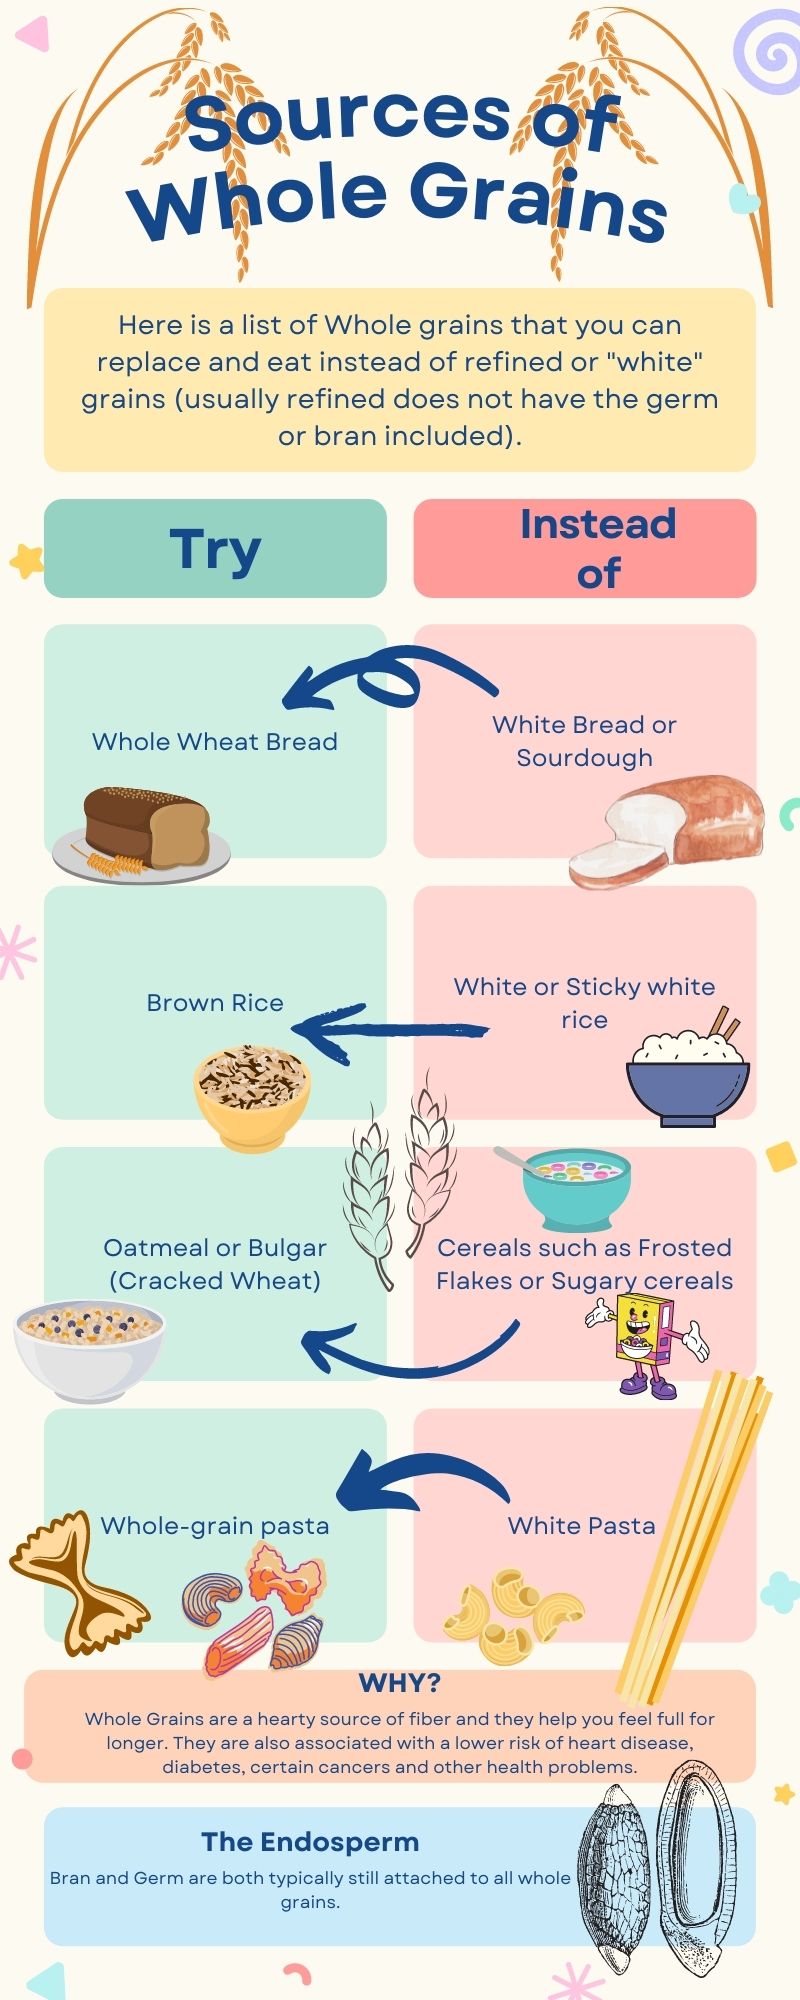 Infographic showing substutions to increase intake of whole grains. Instead of white bread try whole wheat bread. Instead of white or sticky rice try brown rice. Instead of sugary cereals try oatmeal. Instead of white pasta try whole grain pasta